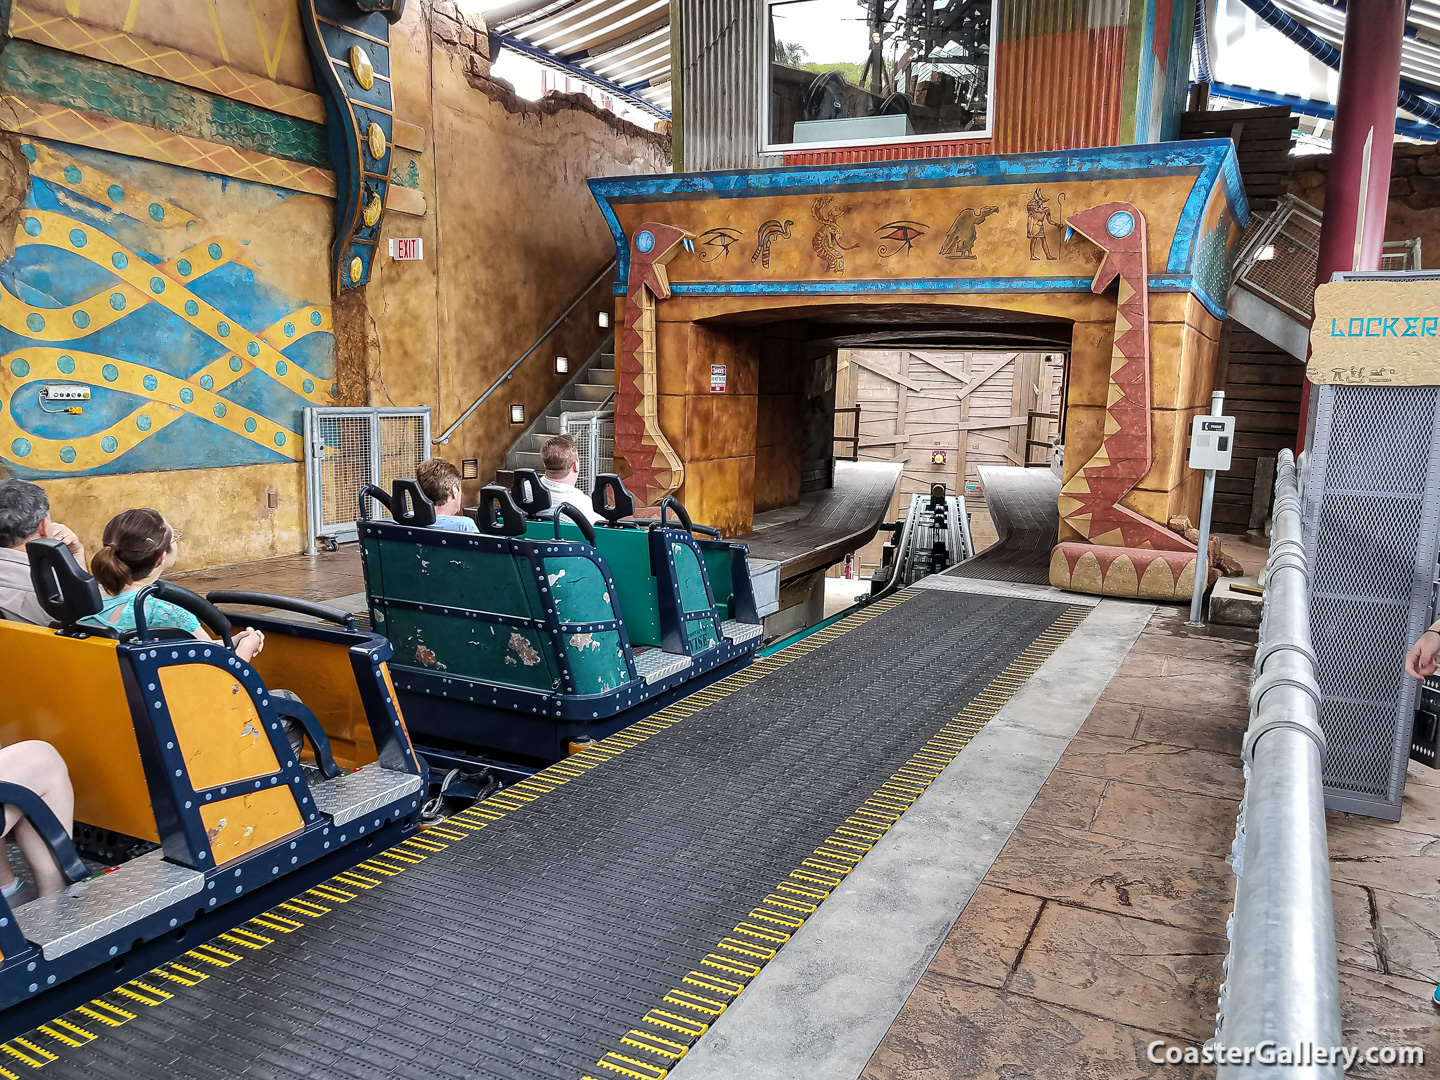 Roller coaster passing through a tunnel and reaching the end of the line - pictures of Busch Gardens Tampa